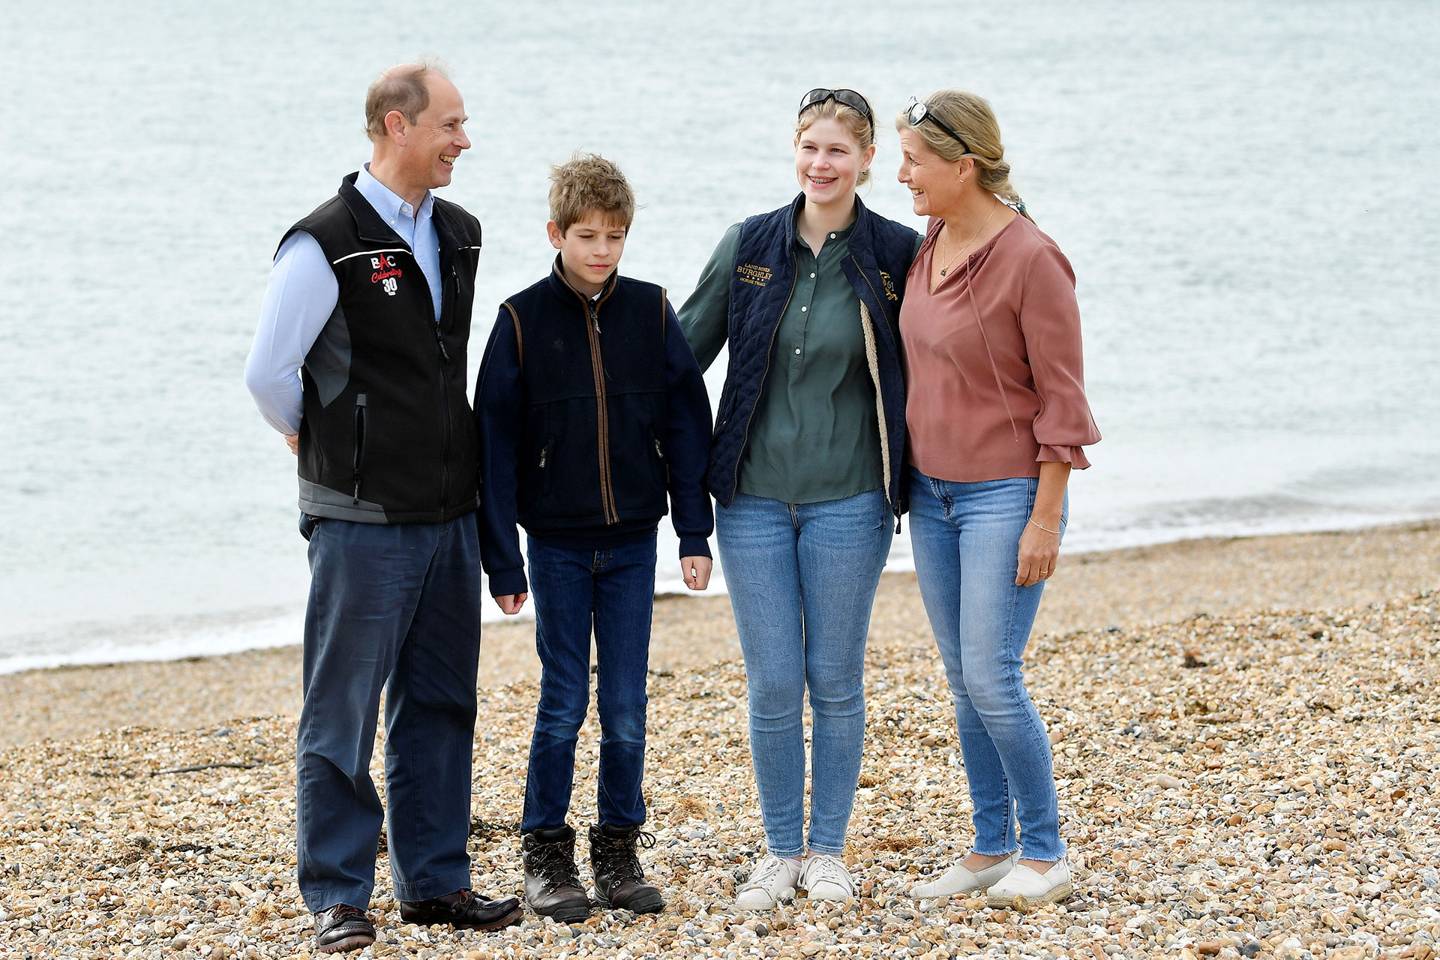 Prince Edward Countess Of Wessex Lady Louise Windsor James Viscount